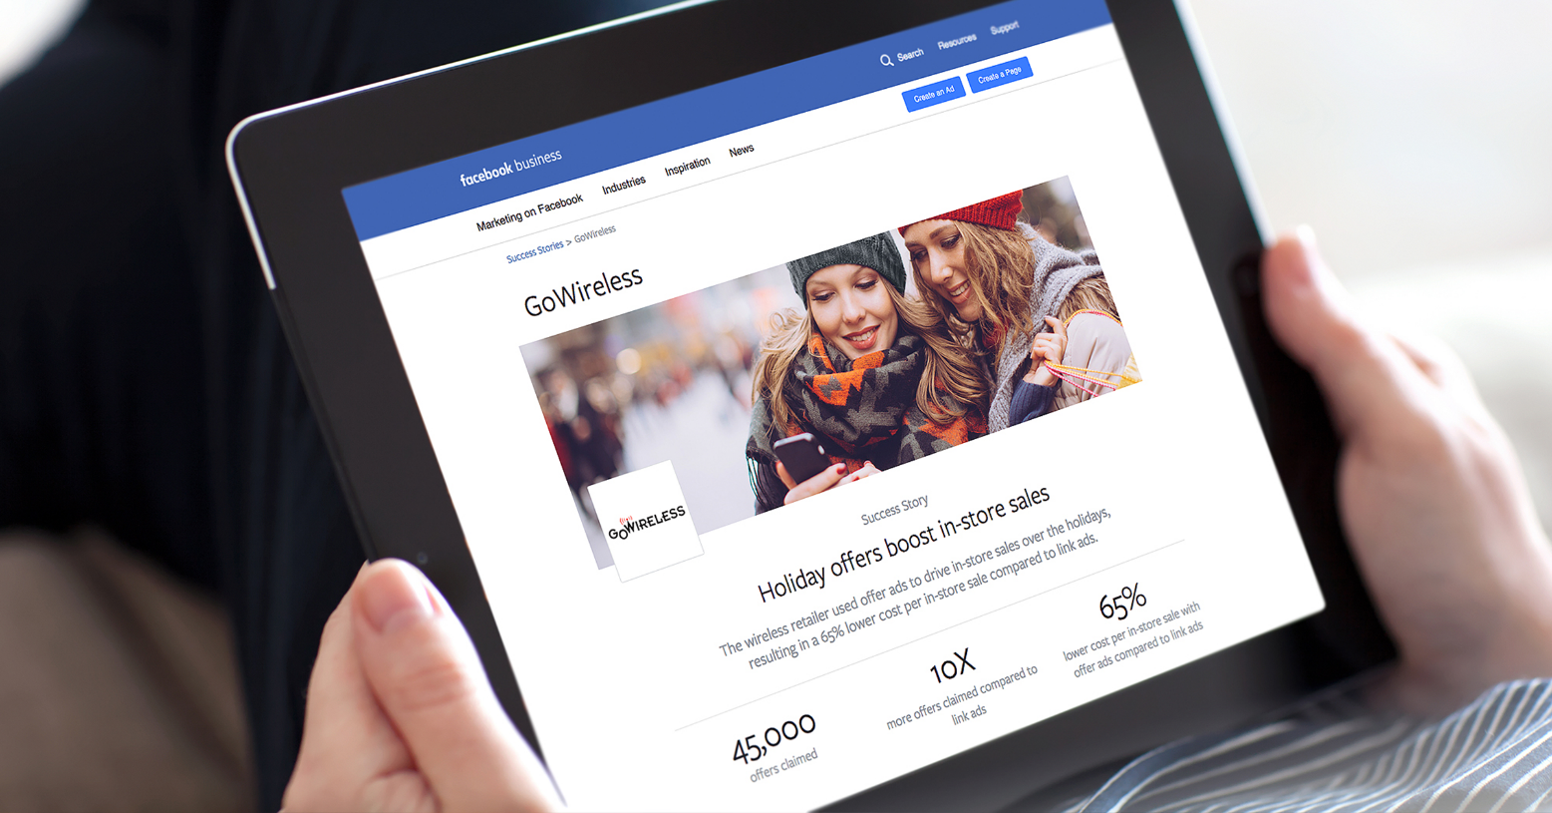 [Case Study]: GoWireless Partners with Mindstream, Boosts In-store Sales with Facebook Offers